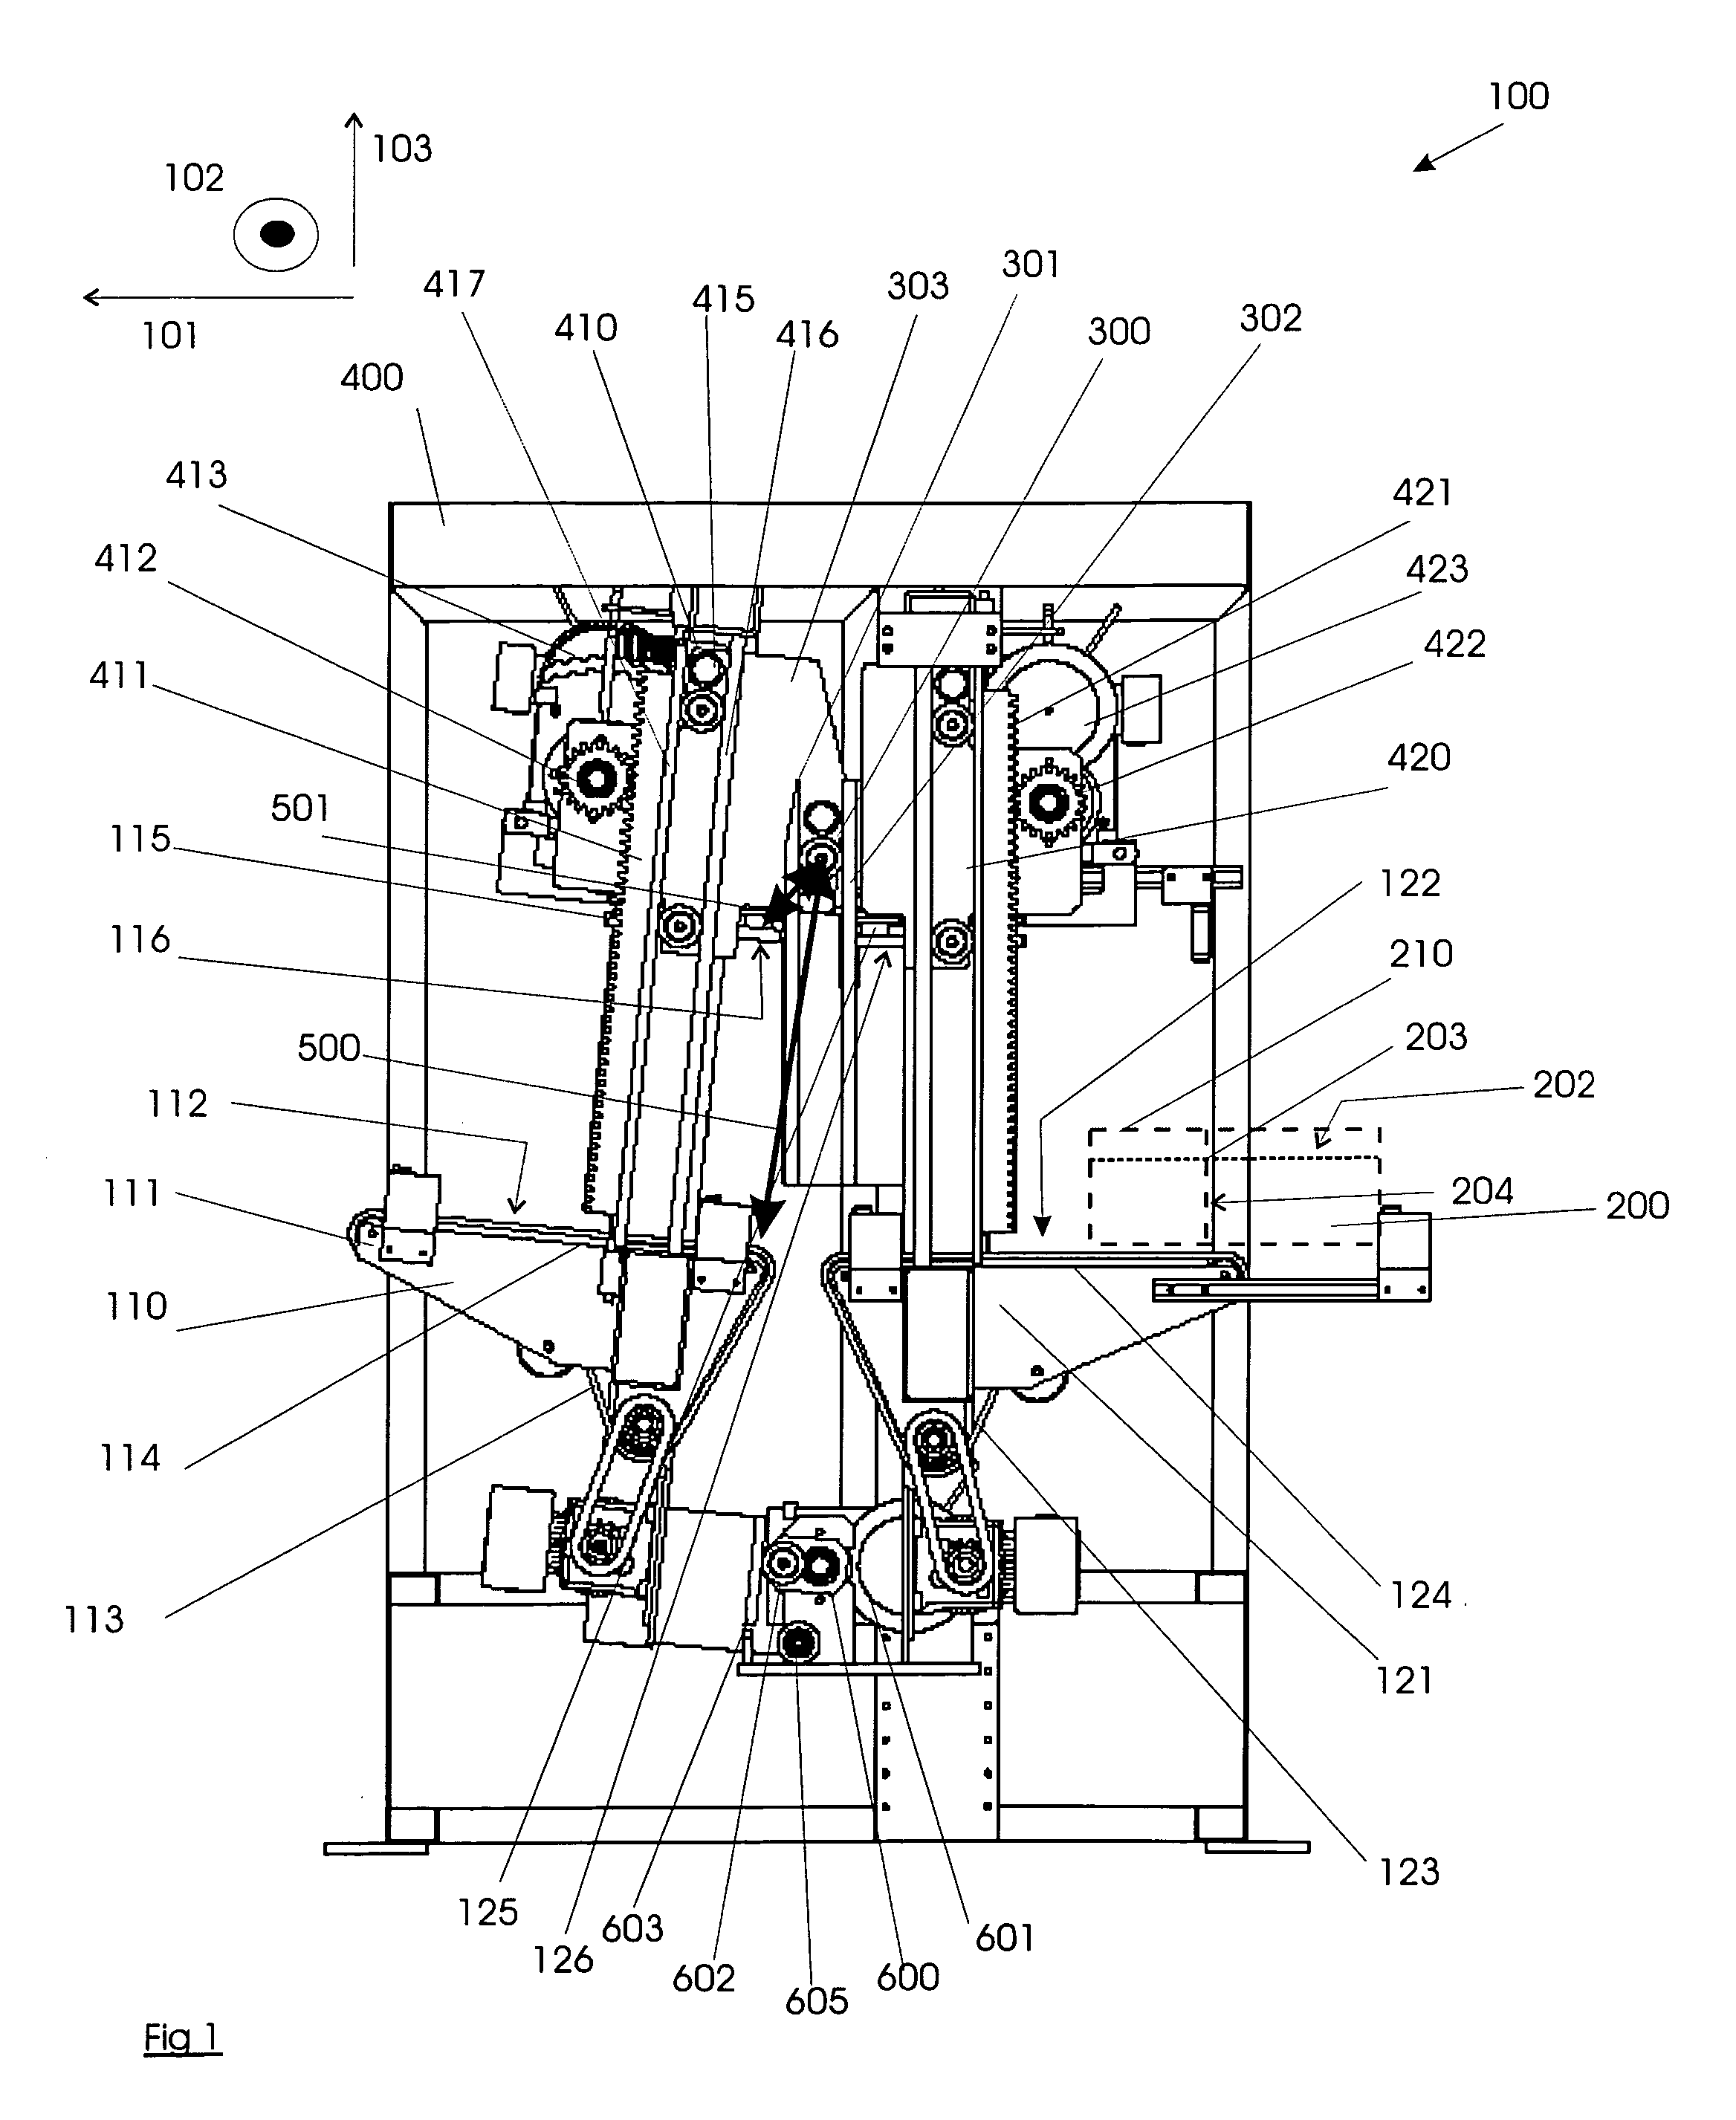 Apparatus and method for separating a stack of sheets from a pile of sheets